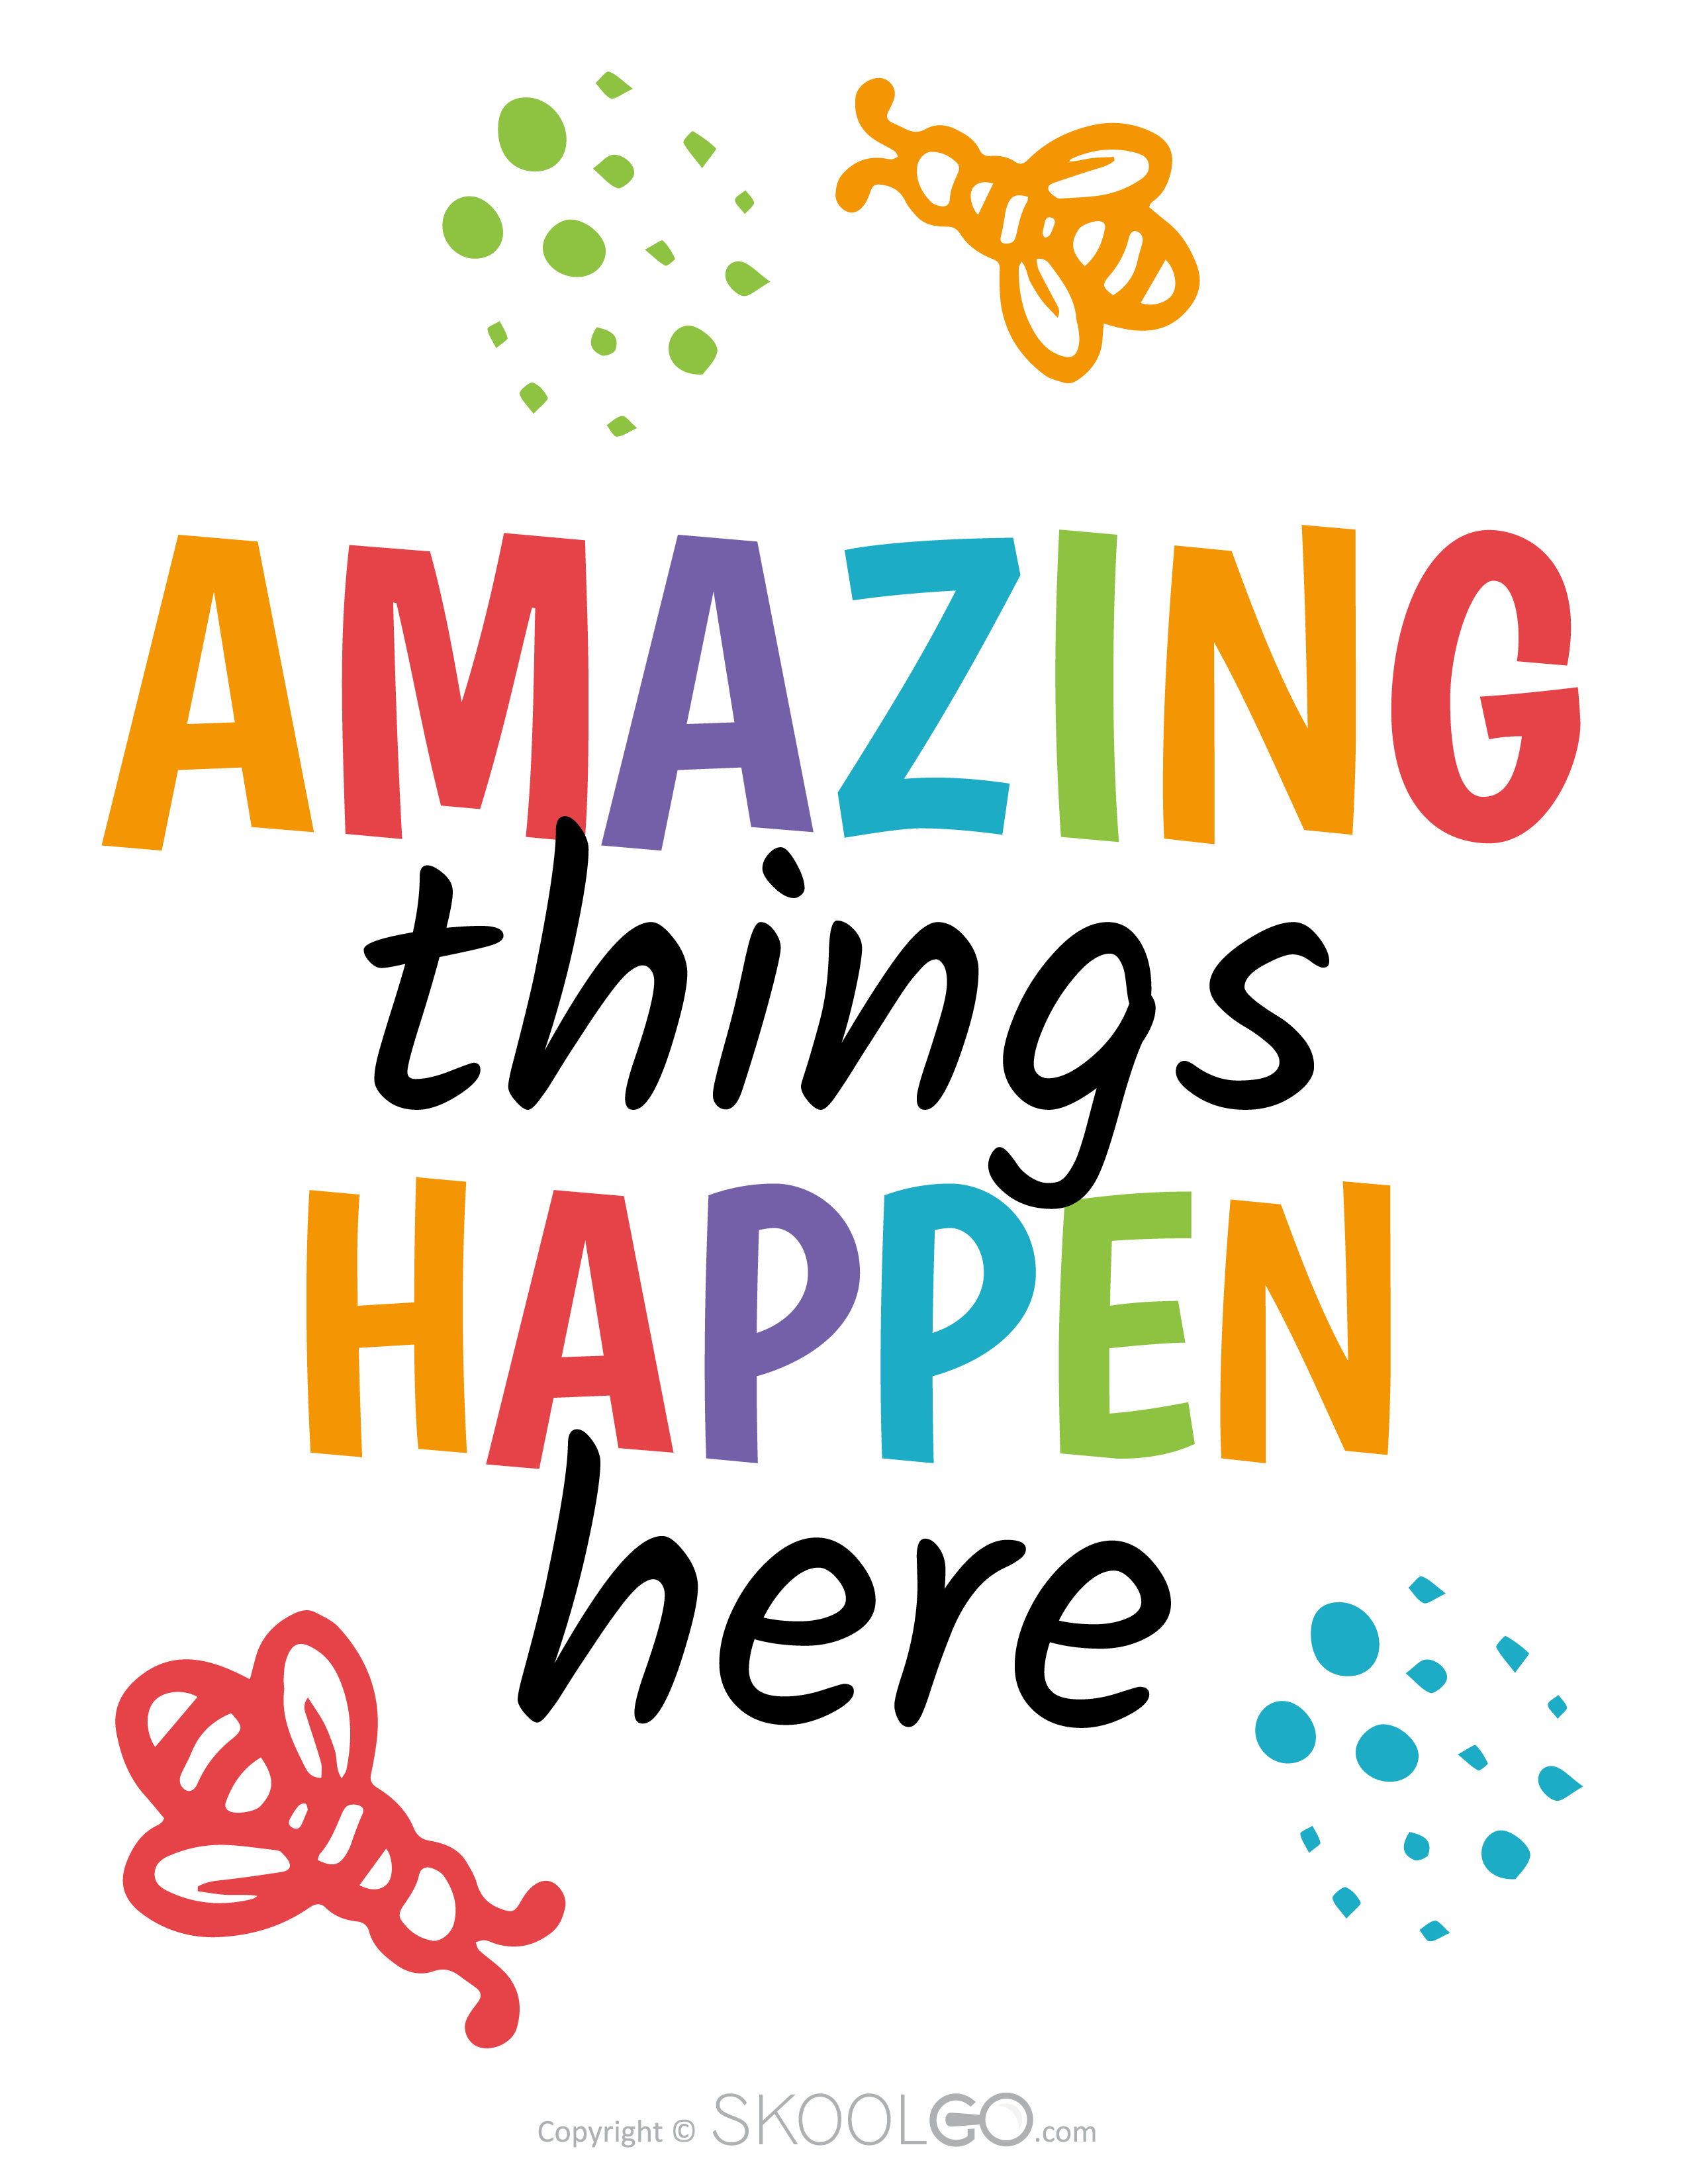 Amazing Things Happen Here - Free Poster